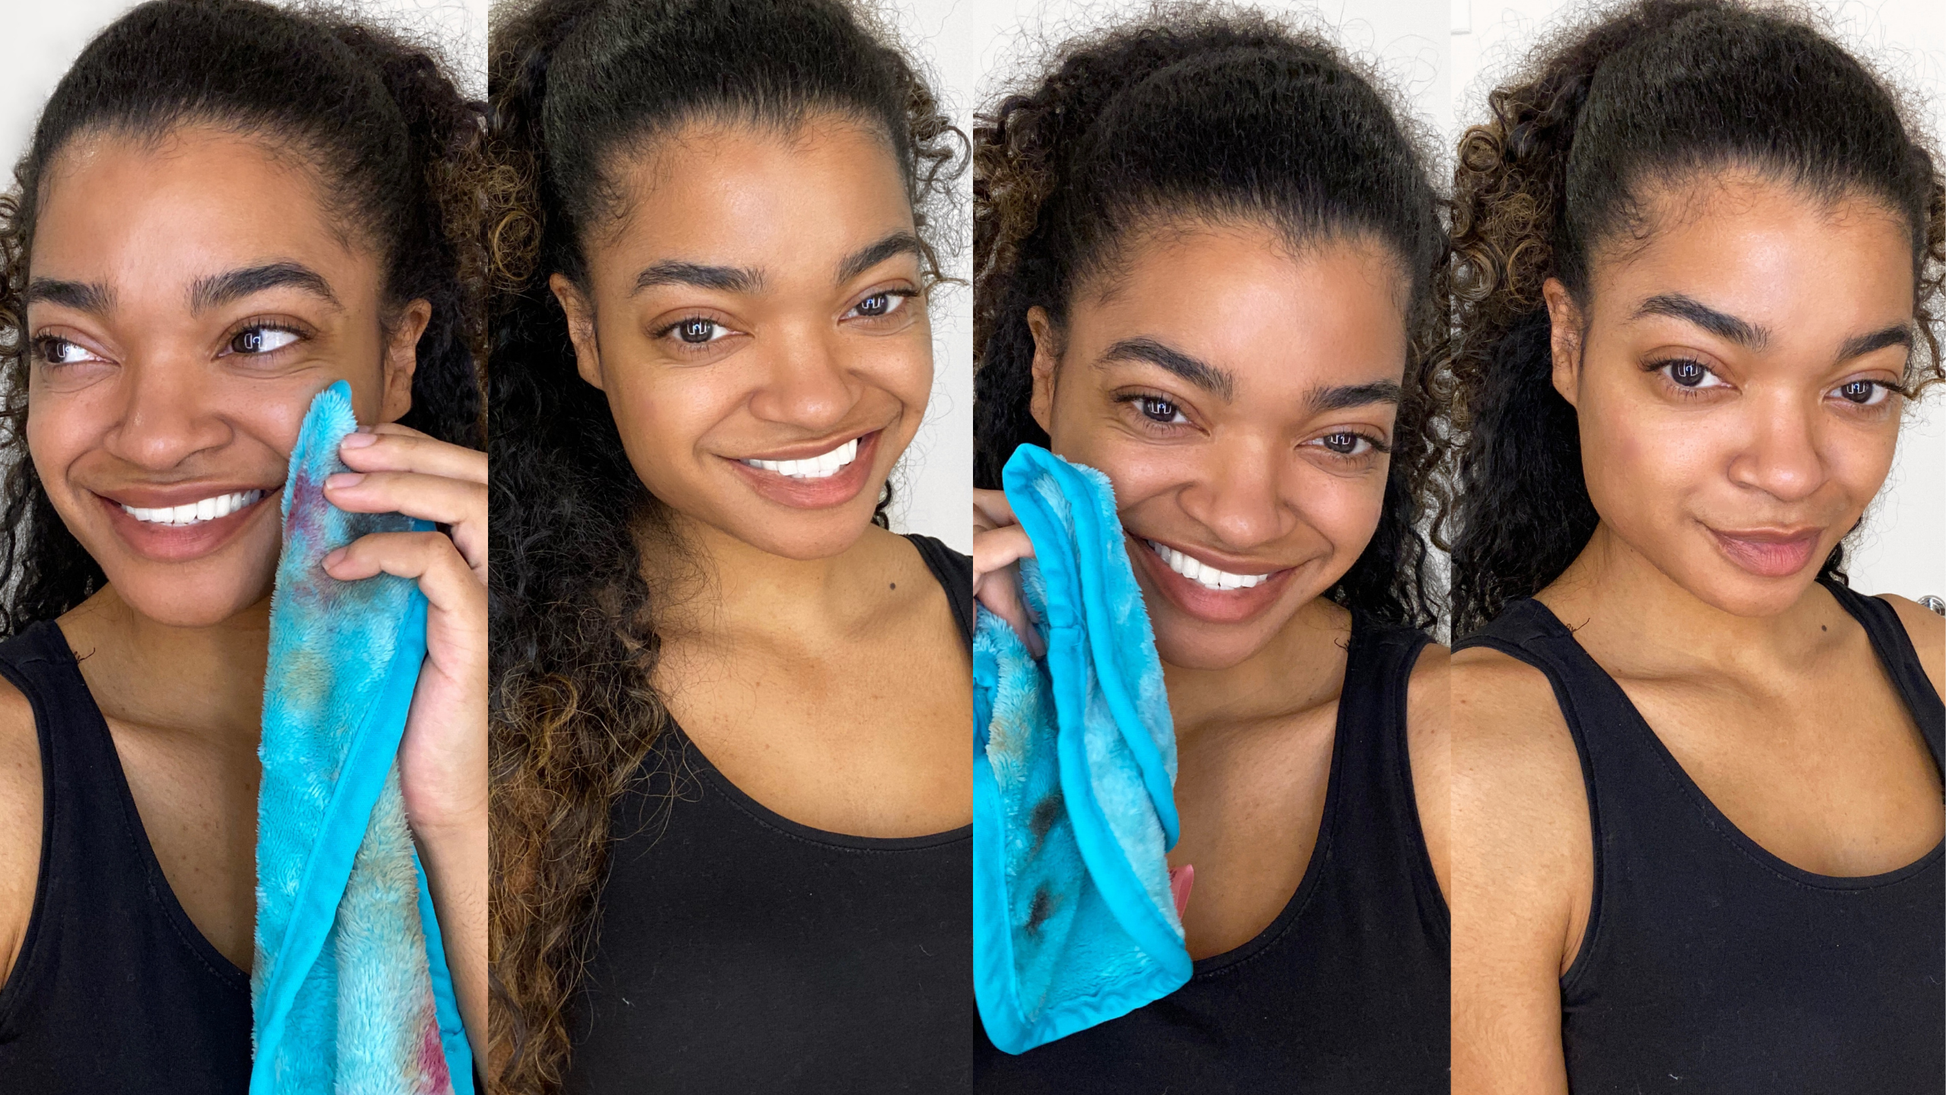 Multiple images of a woman smiling and holding a Fresh Turquoise MakeUp Eraser up to her face.